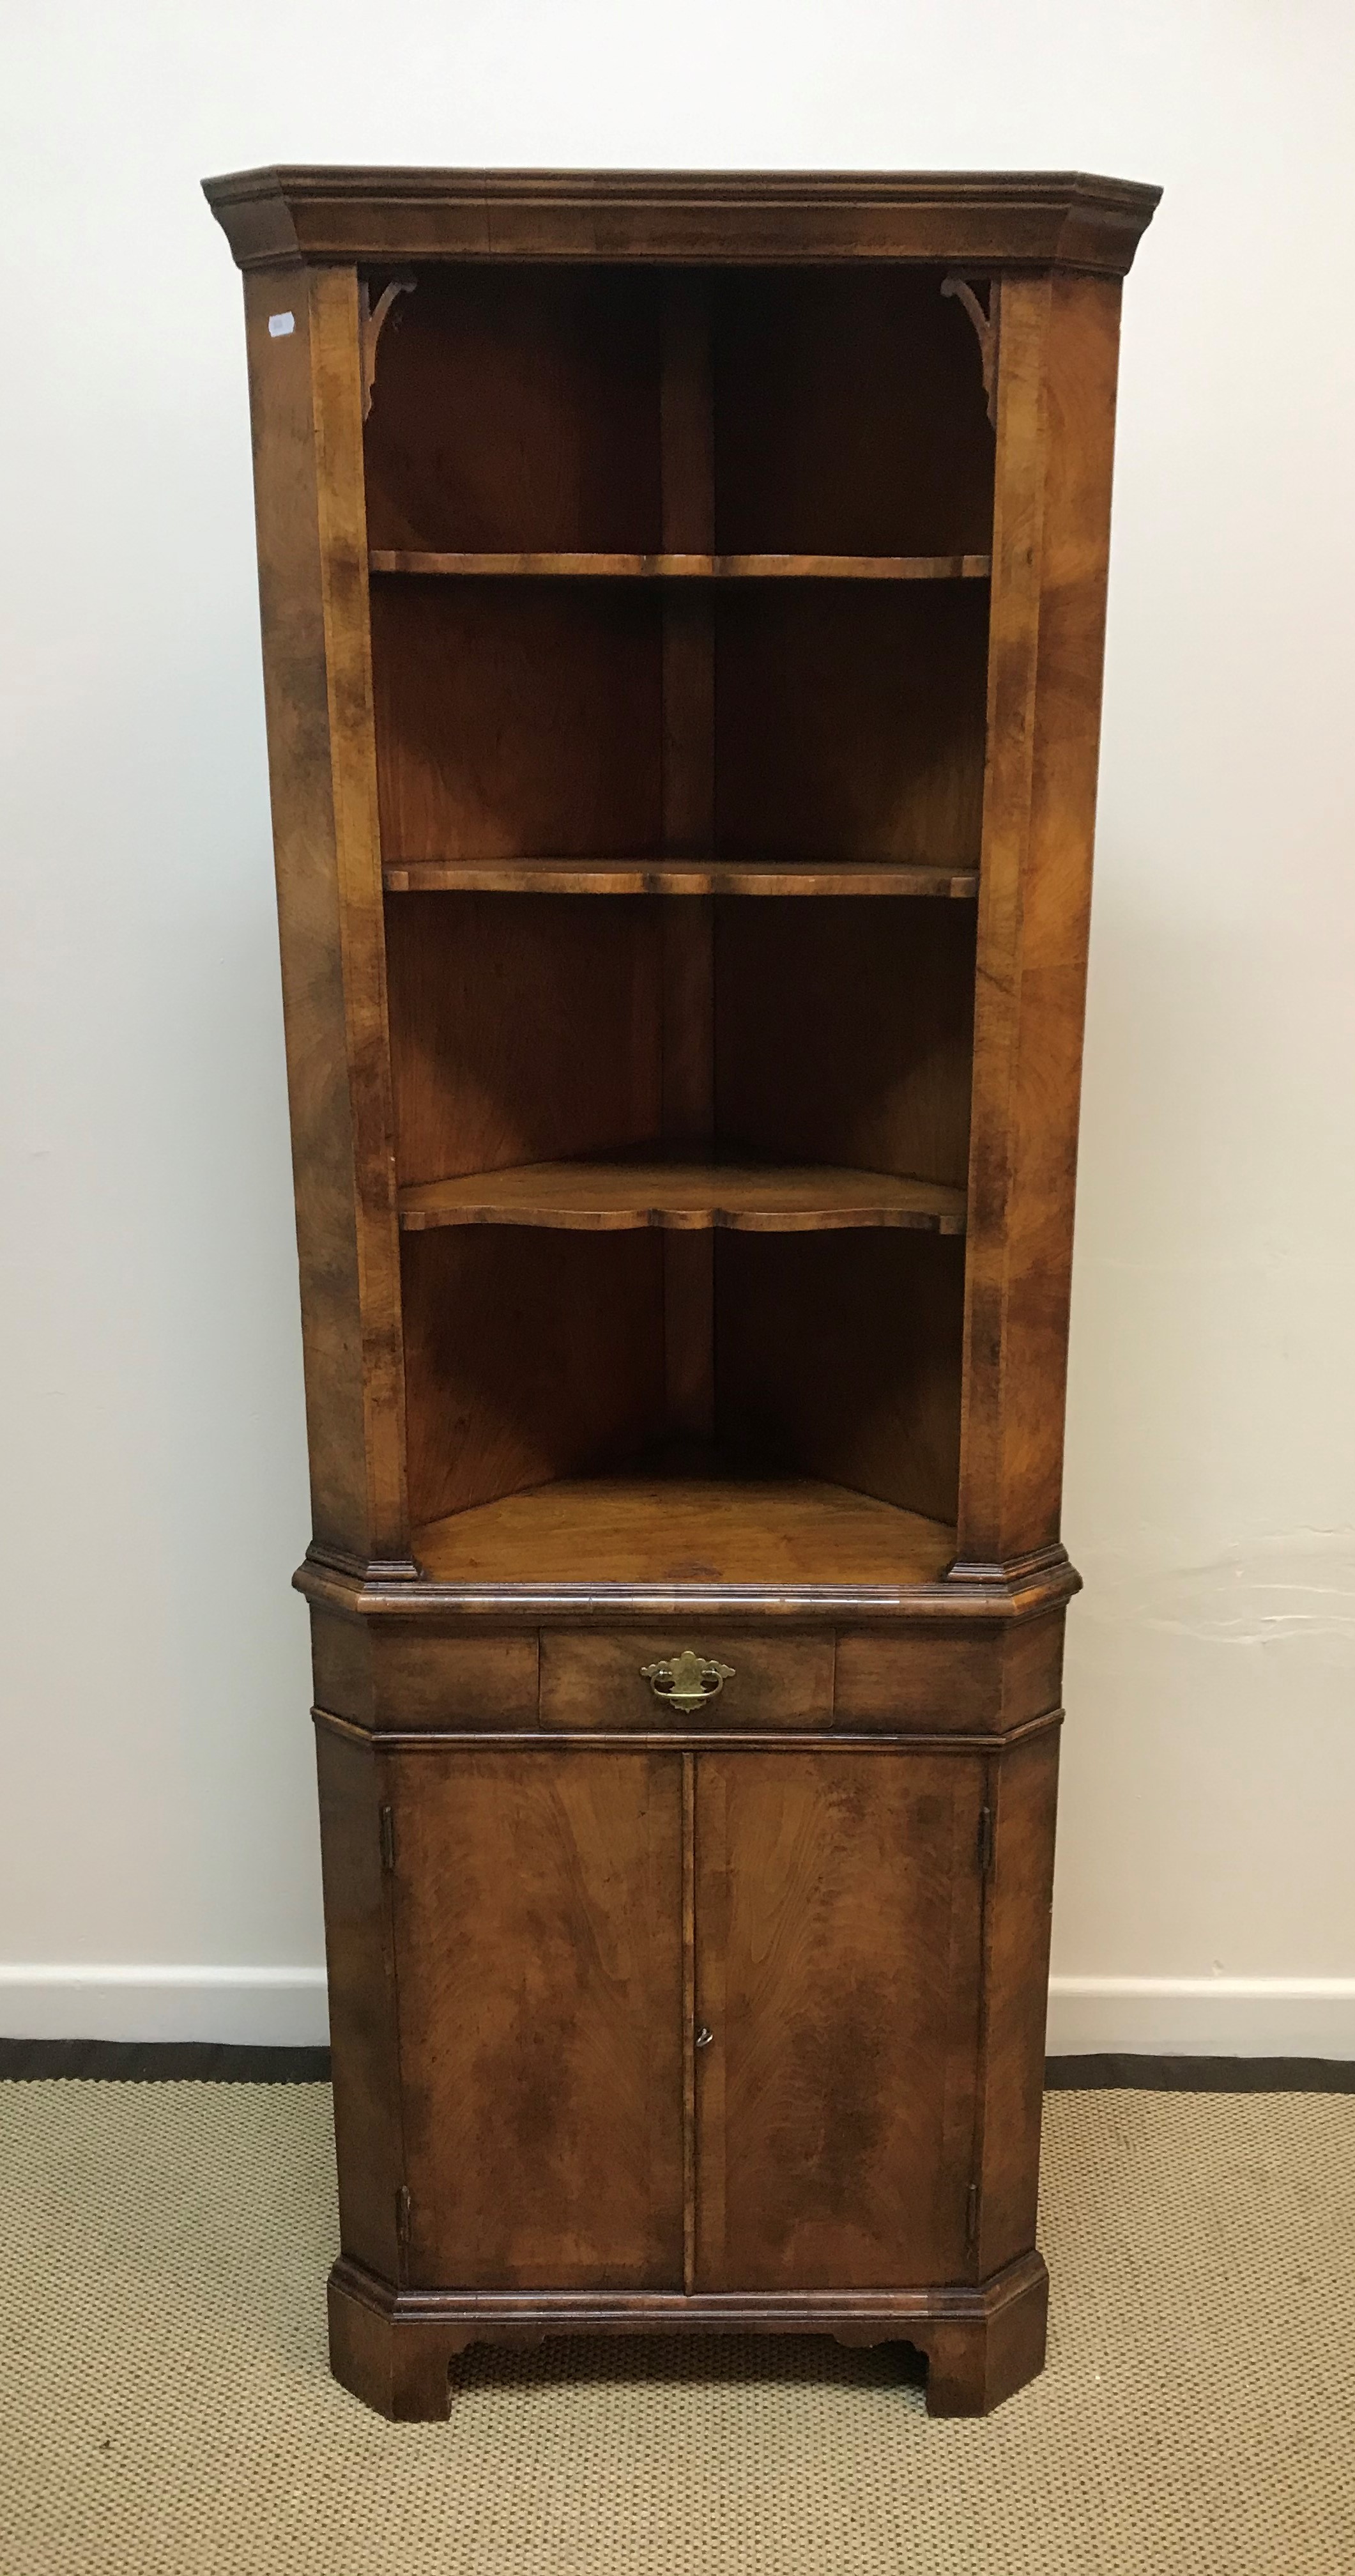 A 20th Century walnut freestanding corner cupboard of small proportions in the 18th Century style,